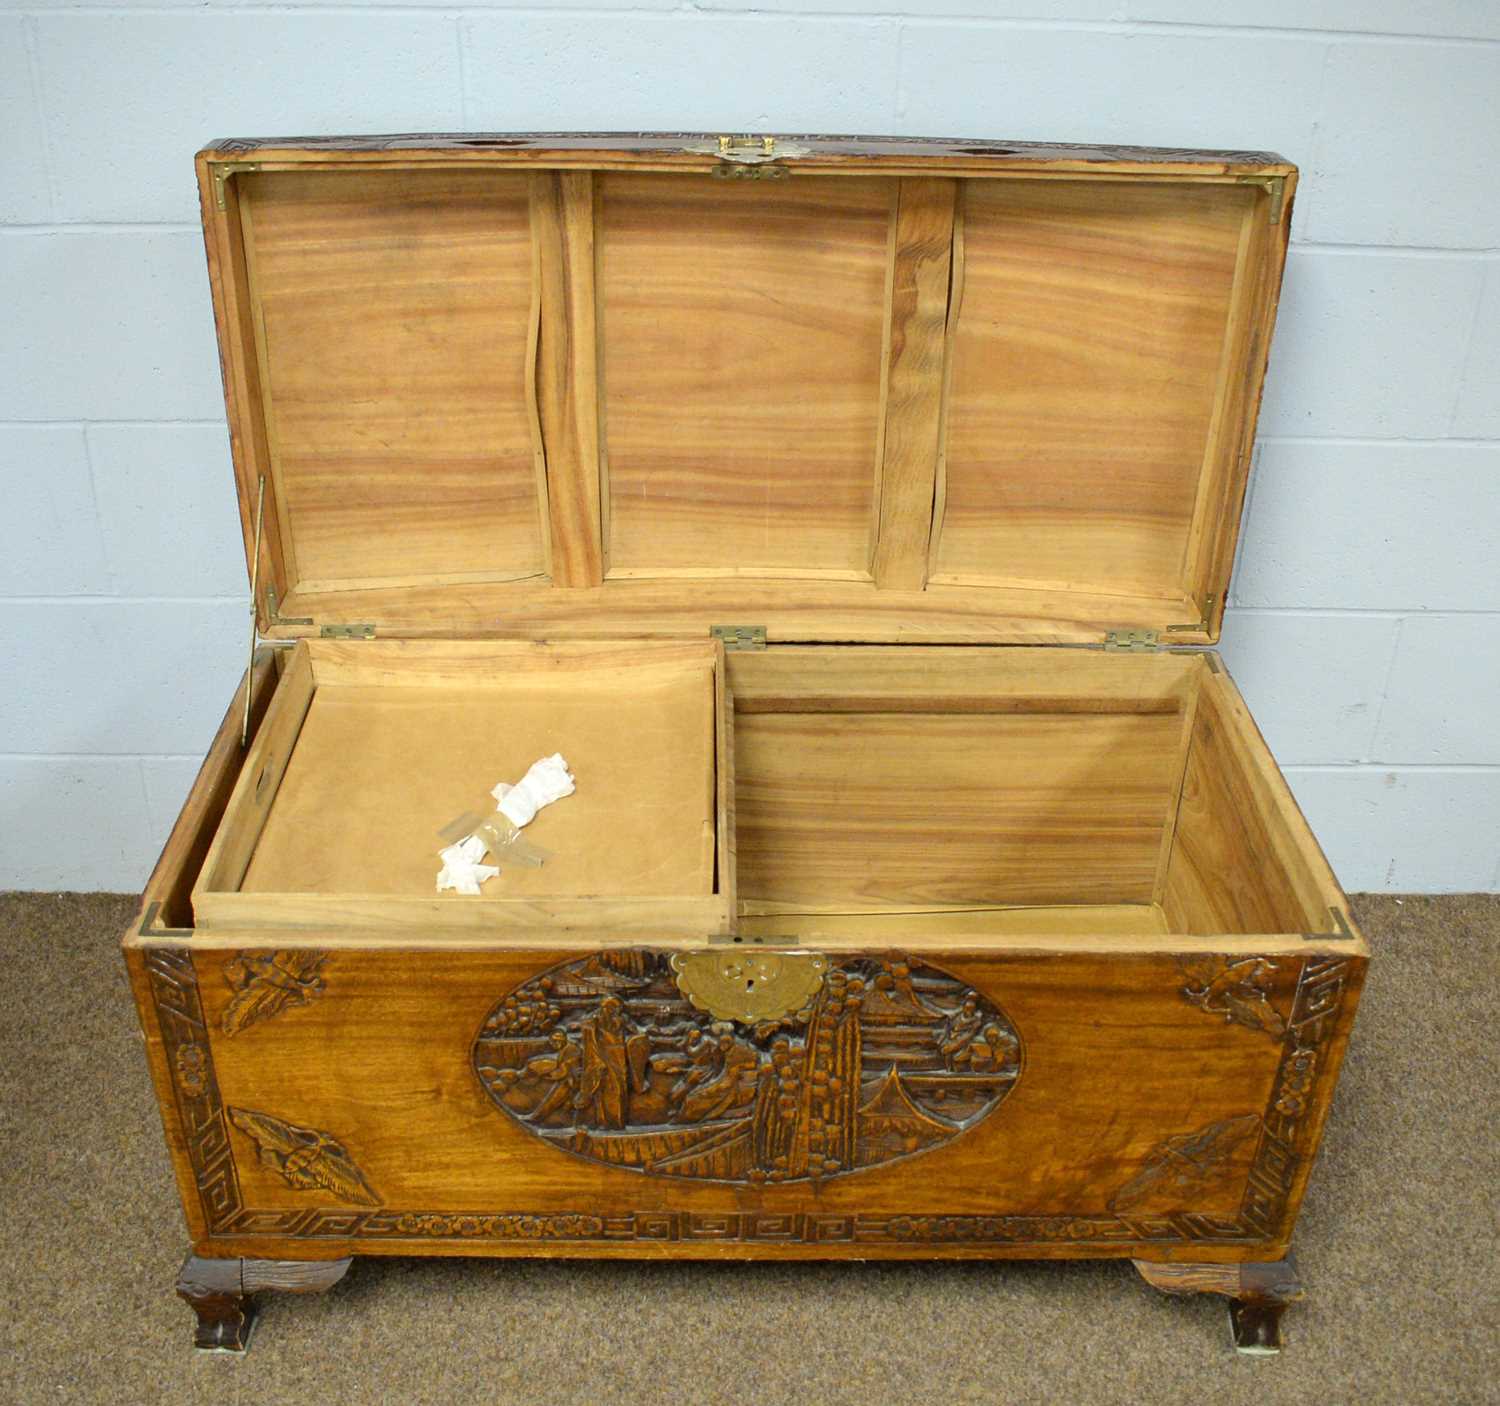 An early 20th Century Chinese camphor wood lined chest. - Image 2 of 2